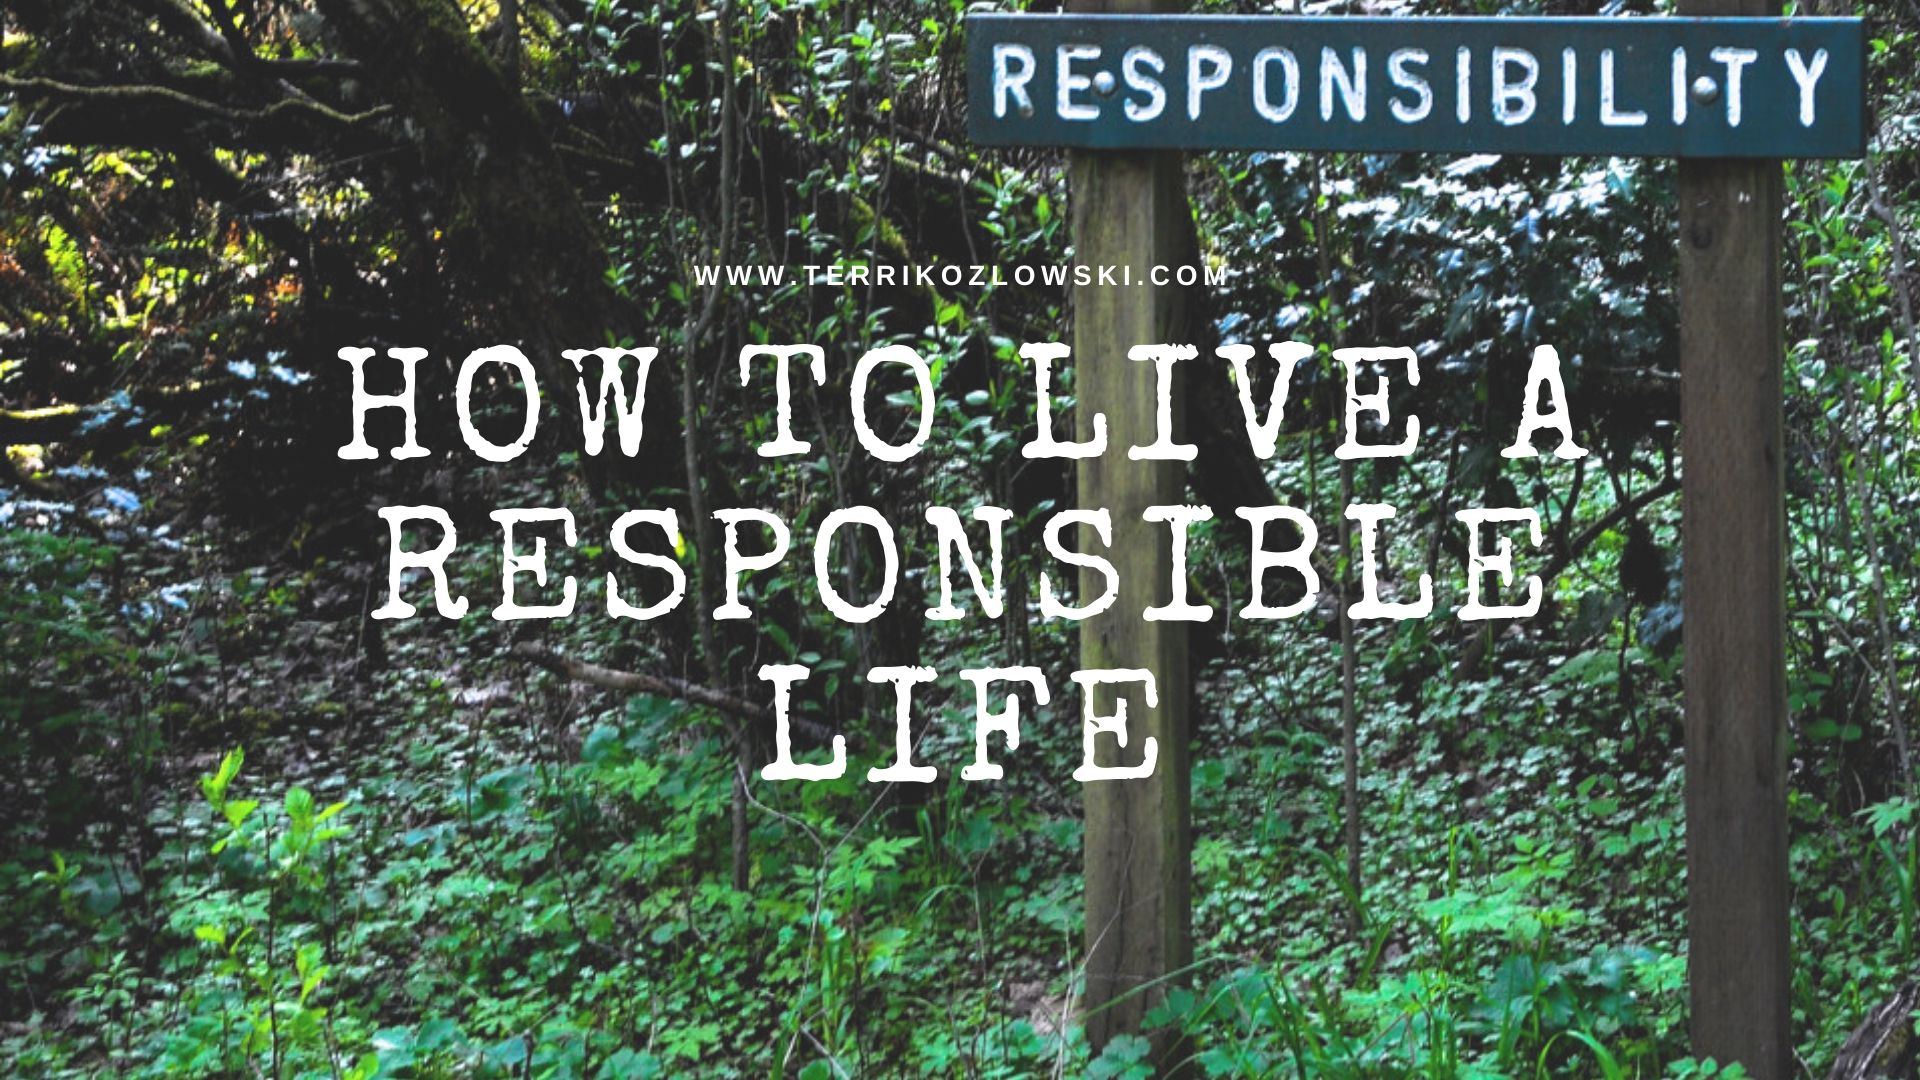 Be Responsible for your life